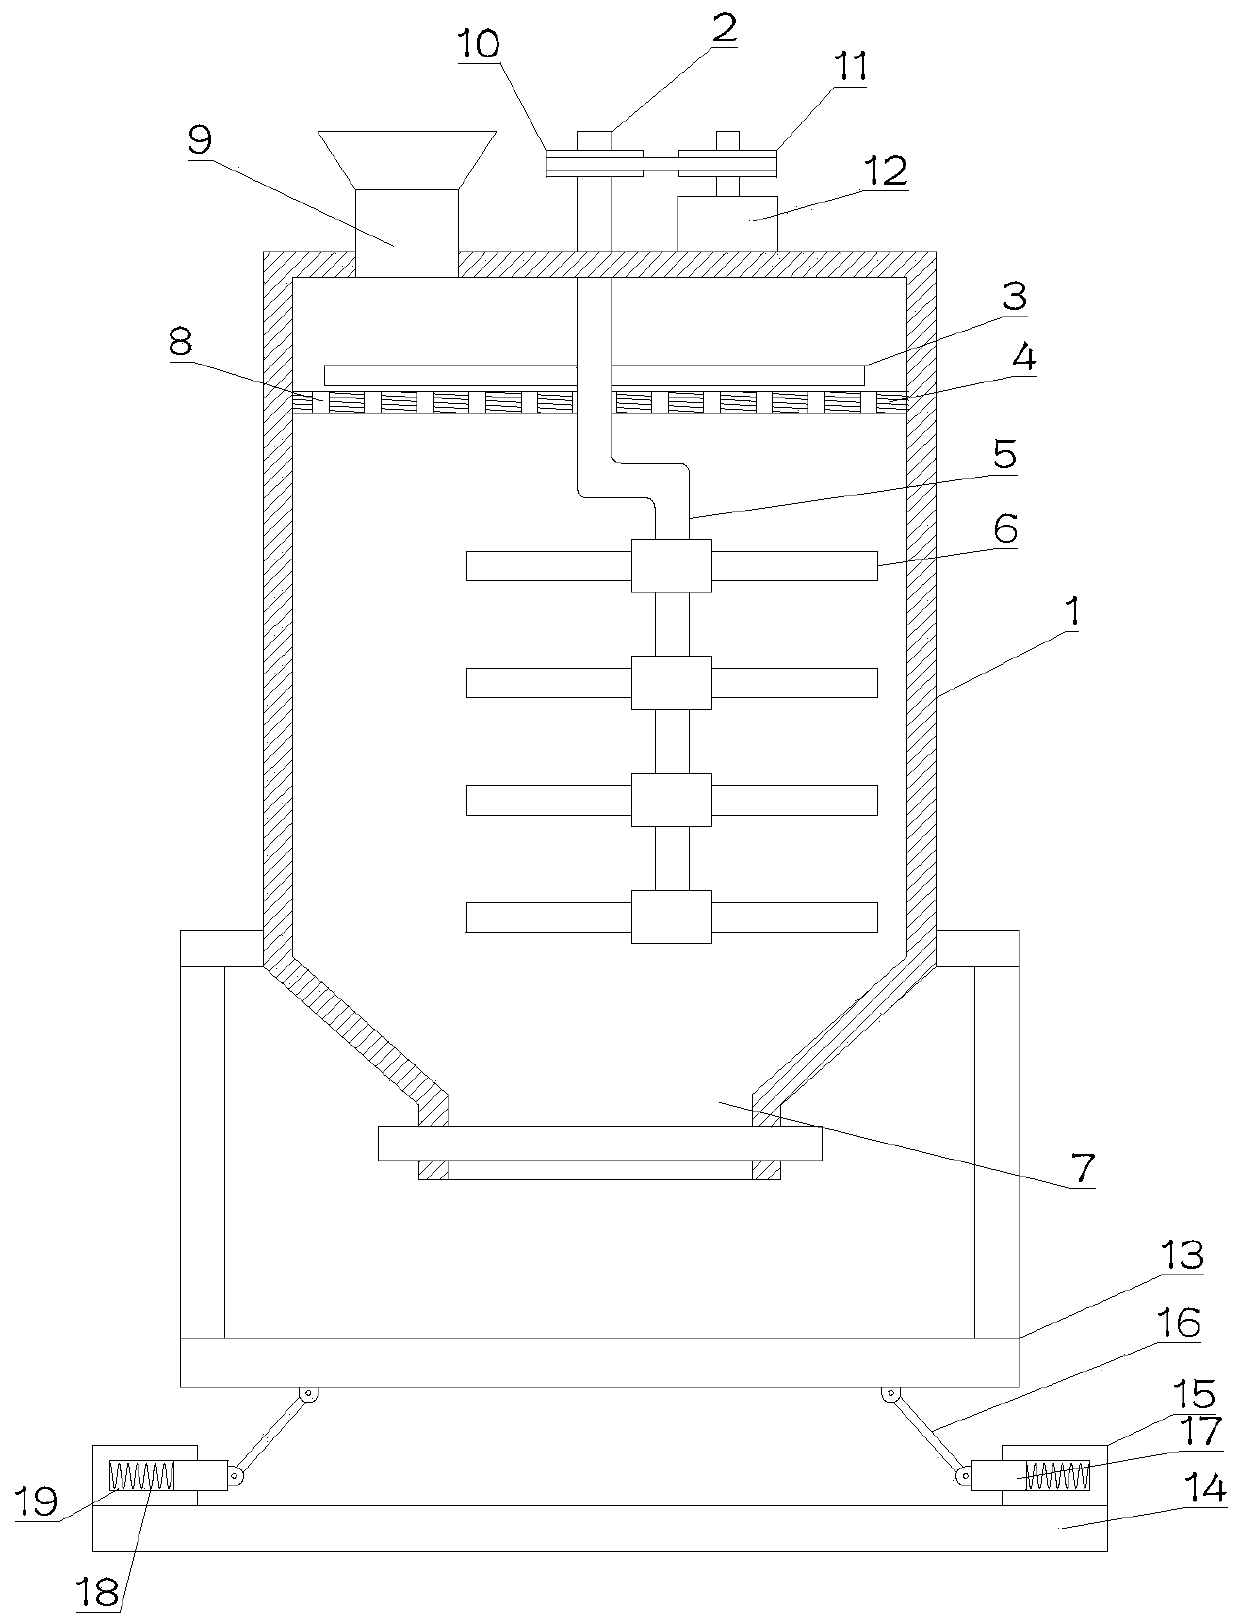 Packing material mixing device